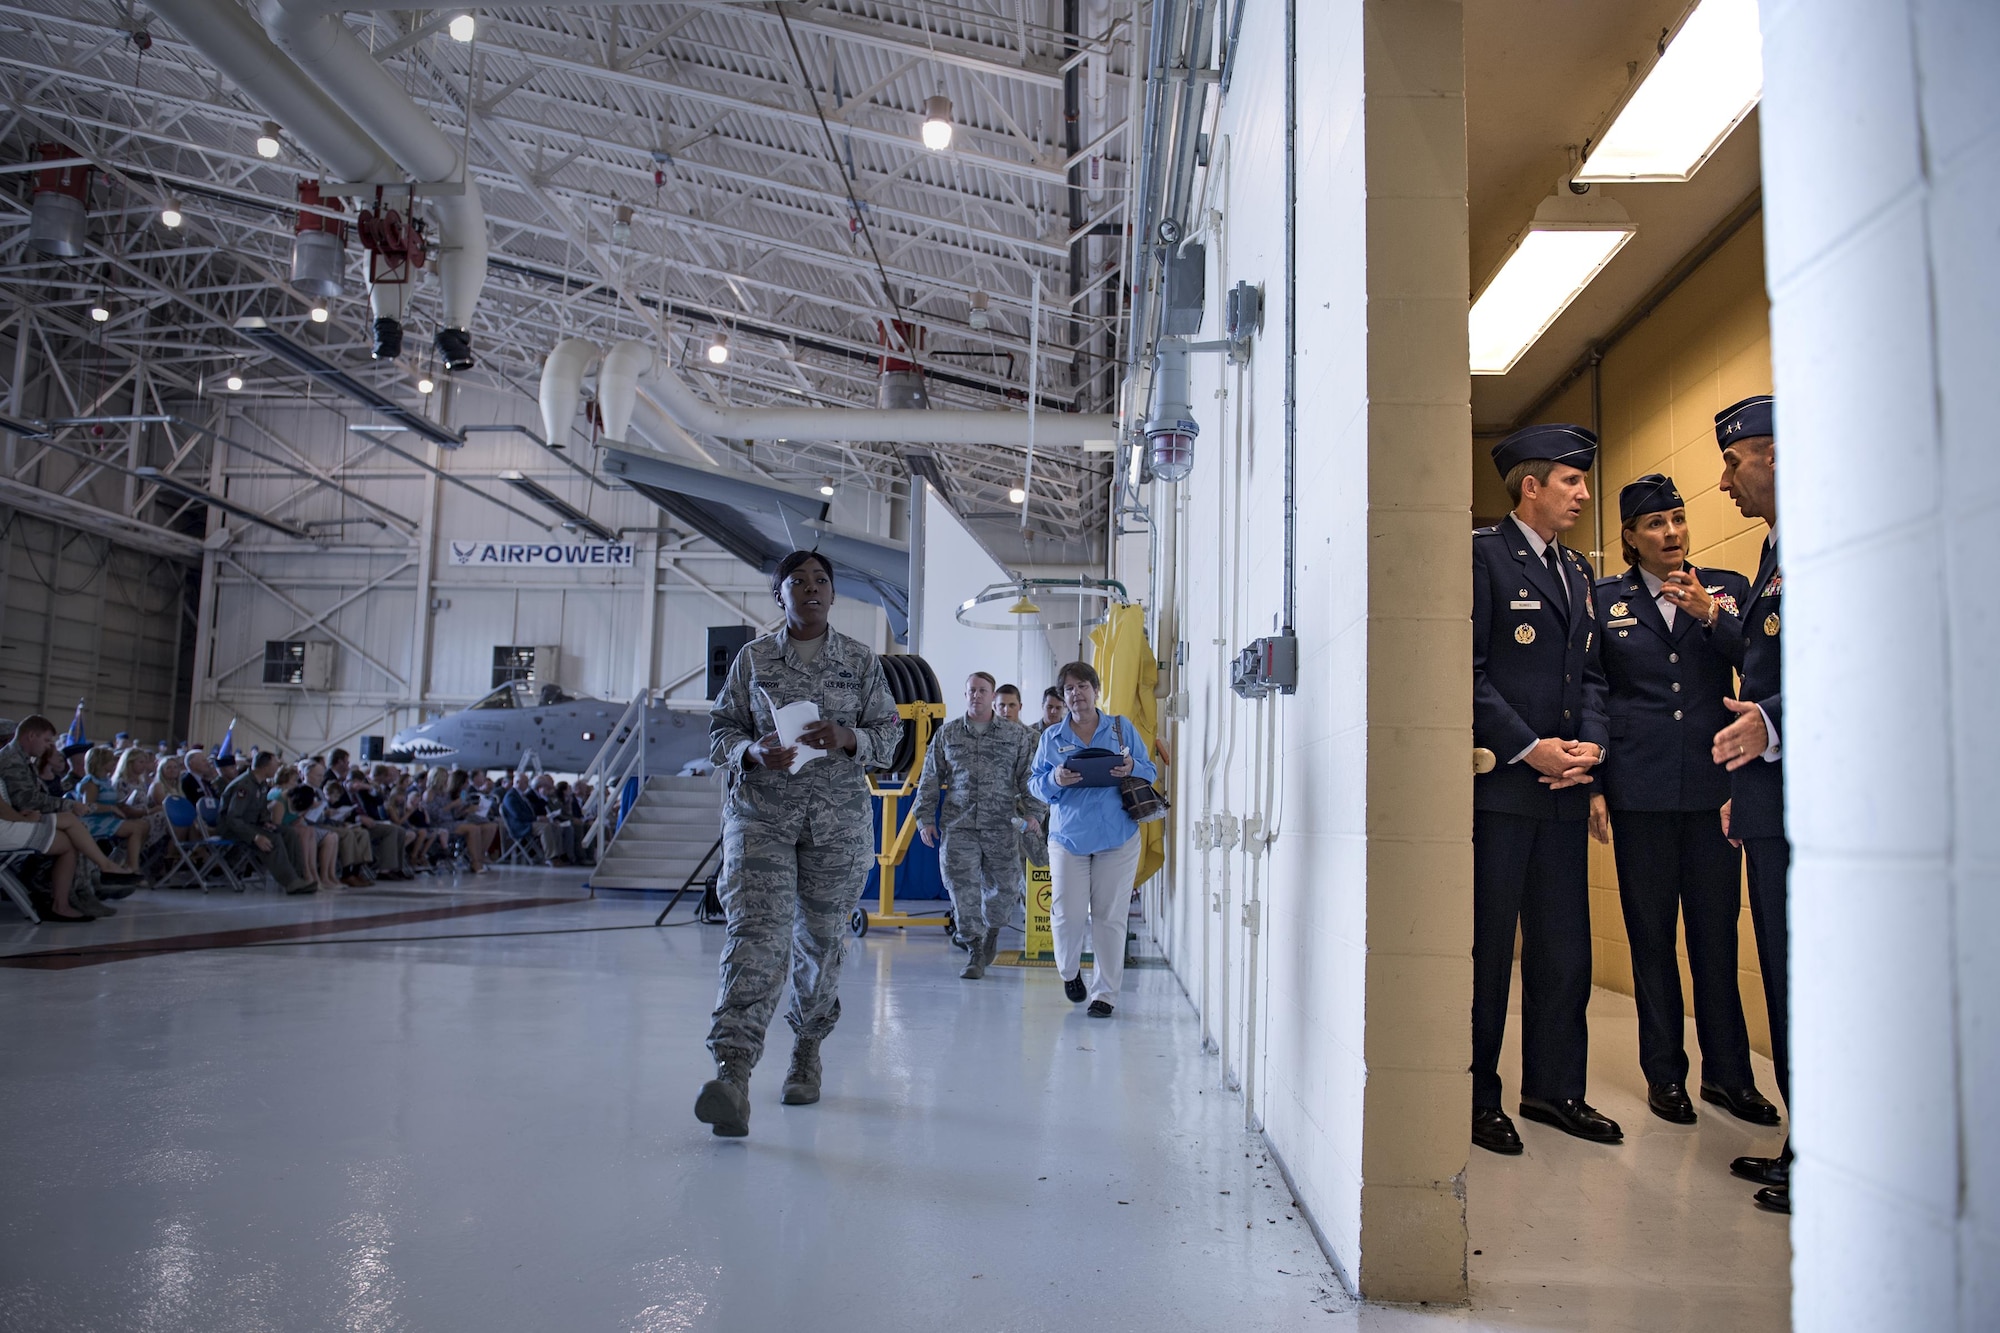 U.S. Air Force Maj. Gen. Scott J. Zobrist, 9th Air Force commander; Col. Jennifer Short, 23d Wing commander; and Col. Thomas Kunkel, outgoing 23d Wing commander, prepare for a change of command ceremony, July 10, 2017, at Moody Air Force Base, Ga. The change of command ceremony is a part of military history signifying the hand-off of responsibility of a unit from one commander to another. (U.S. Air Force photo by Staff Sgt. Ryan Callaghan)